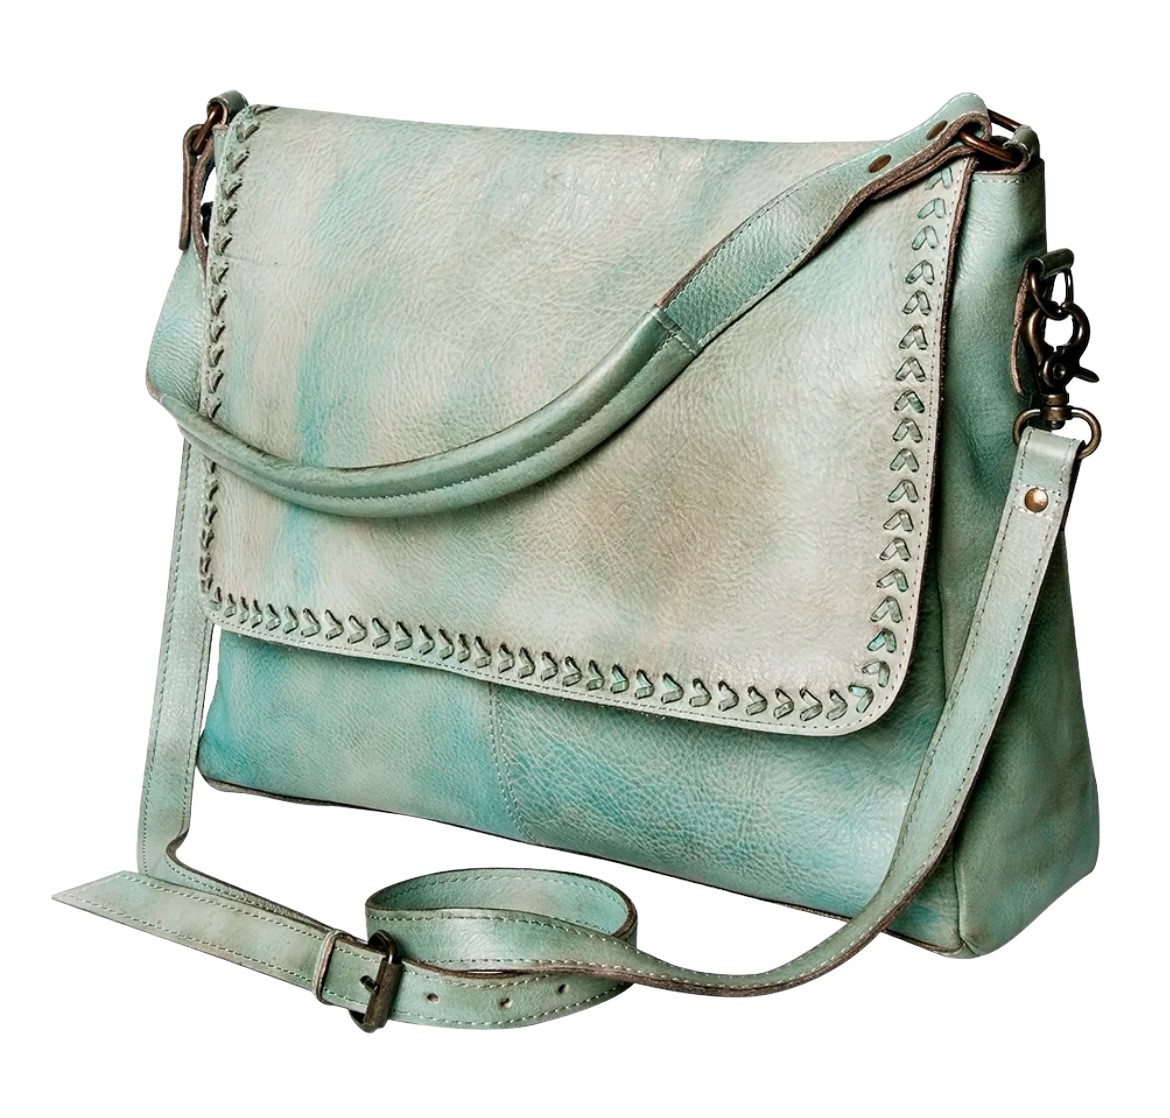 Women's Never Mind Distressed Mint Leather Purse 